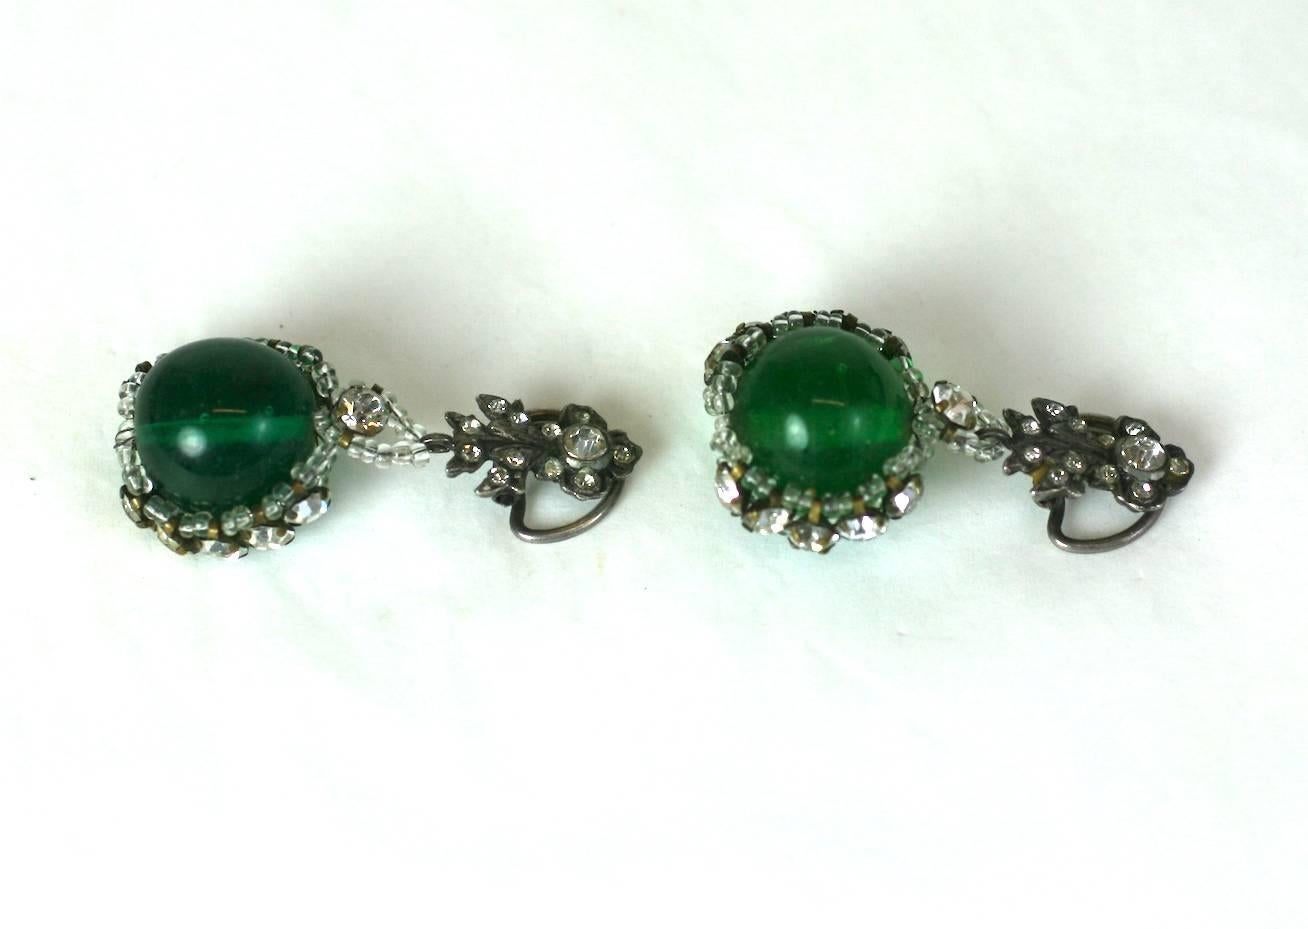 Rousselet Emerald Pate de Verre and Embroidered Earrings In Excellent Condition For Sale In New York, NY